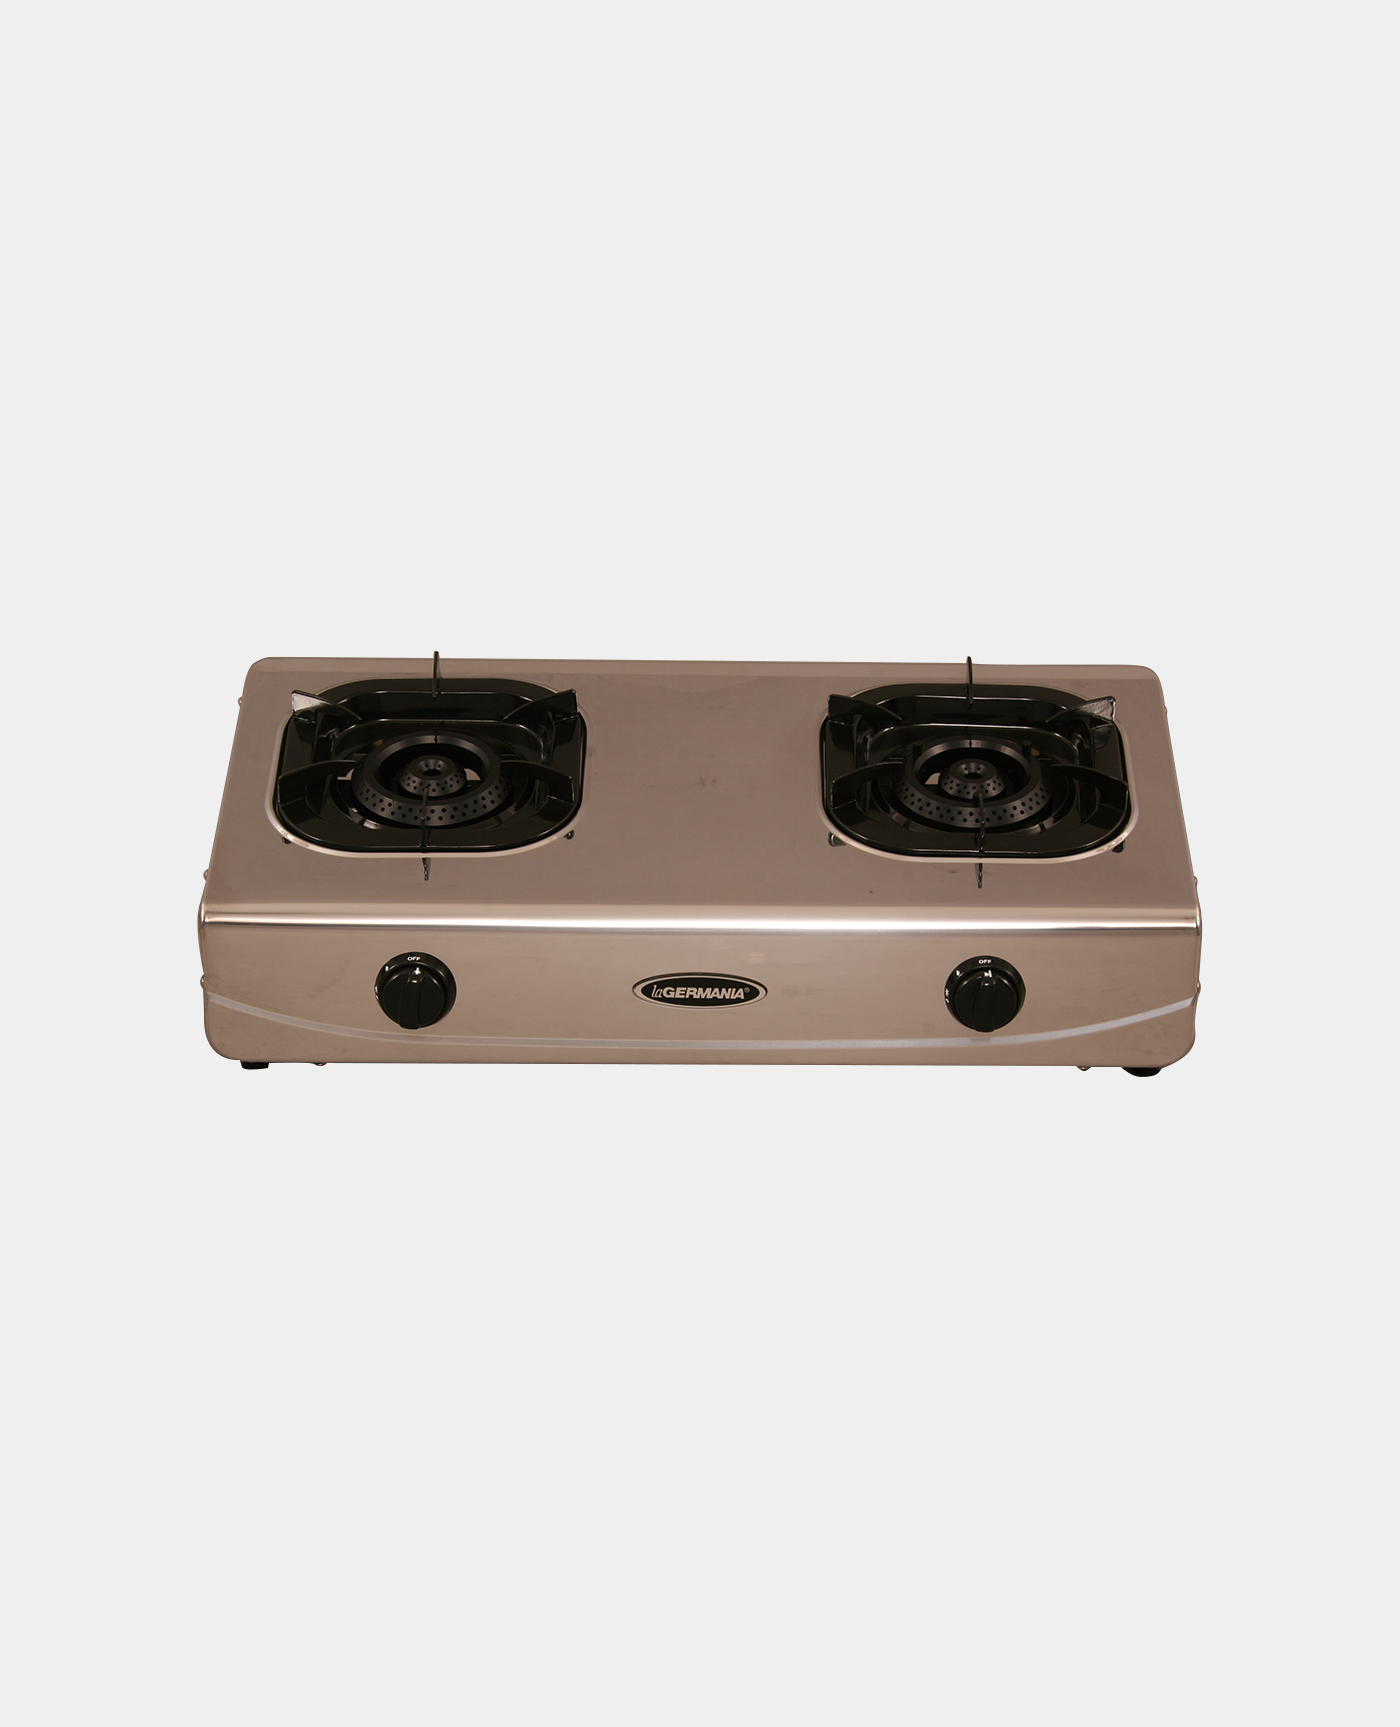 70-stainless-gas-stove-la-germania-philippines